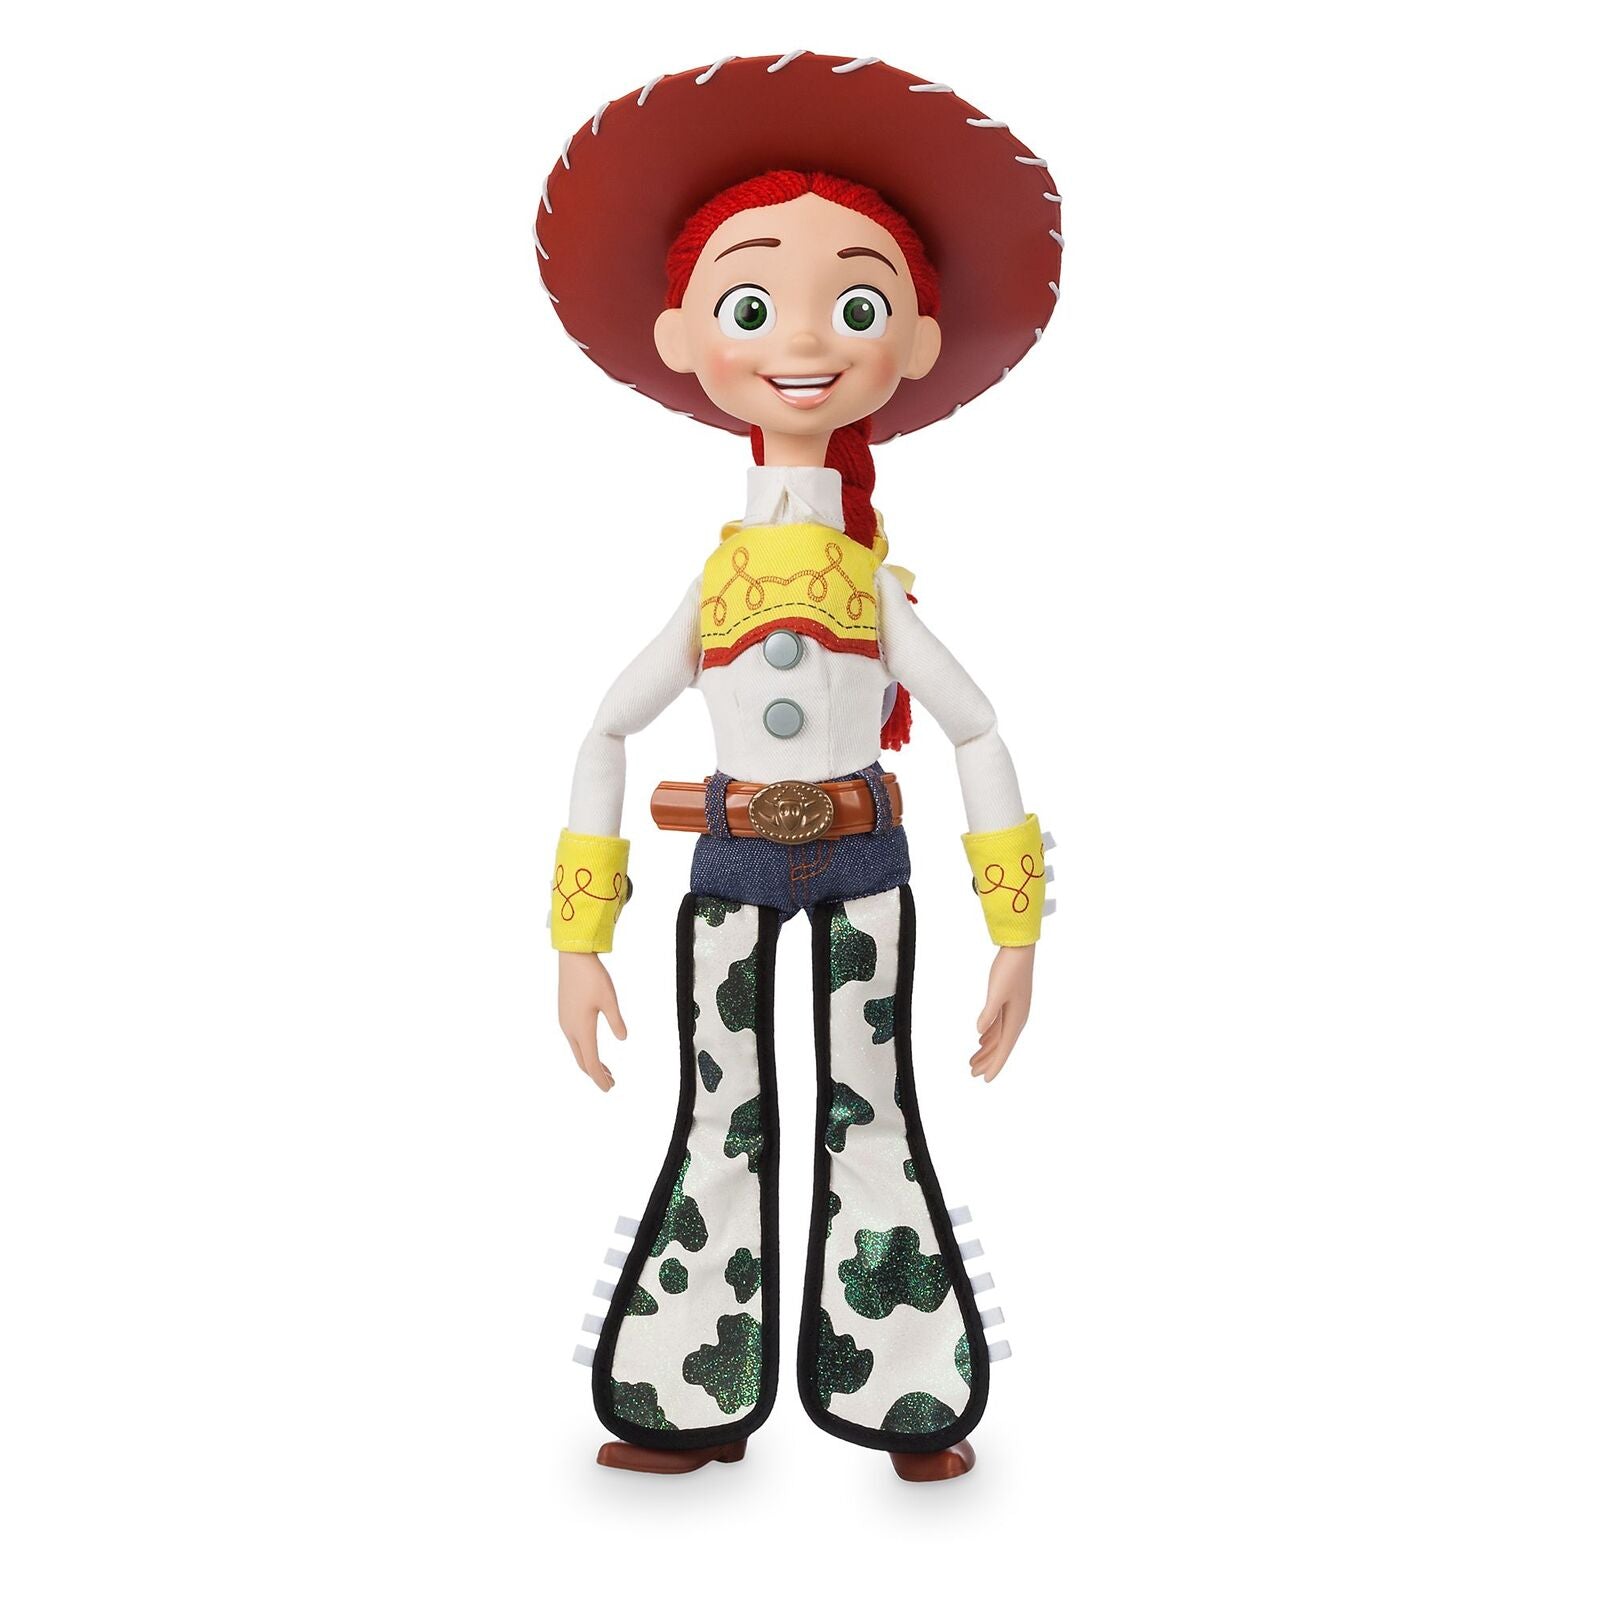 Toy Story Talking Interactive Action Figure - Jessie